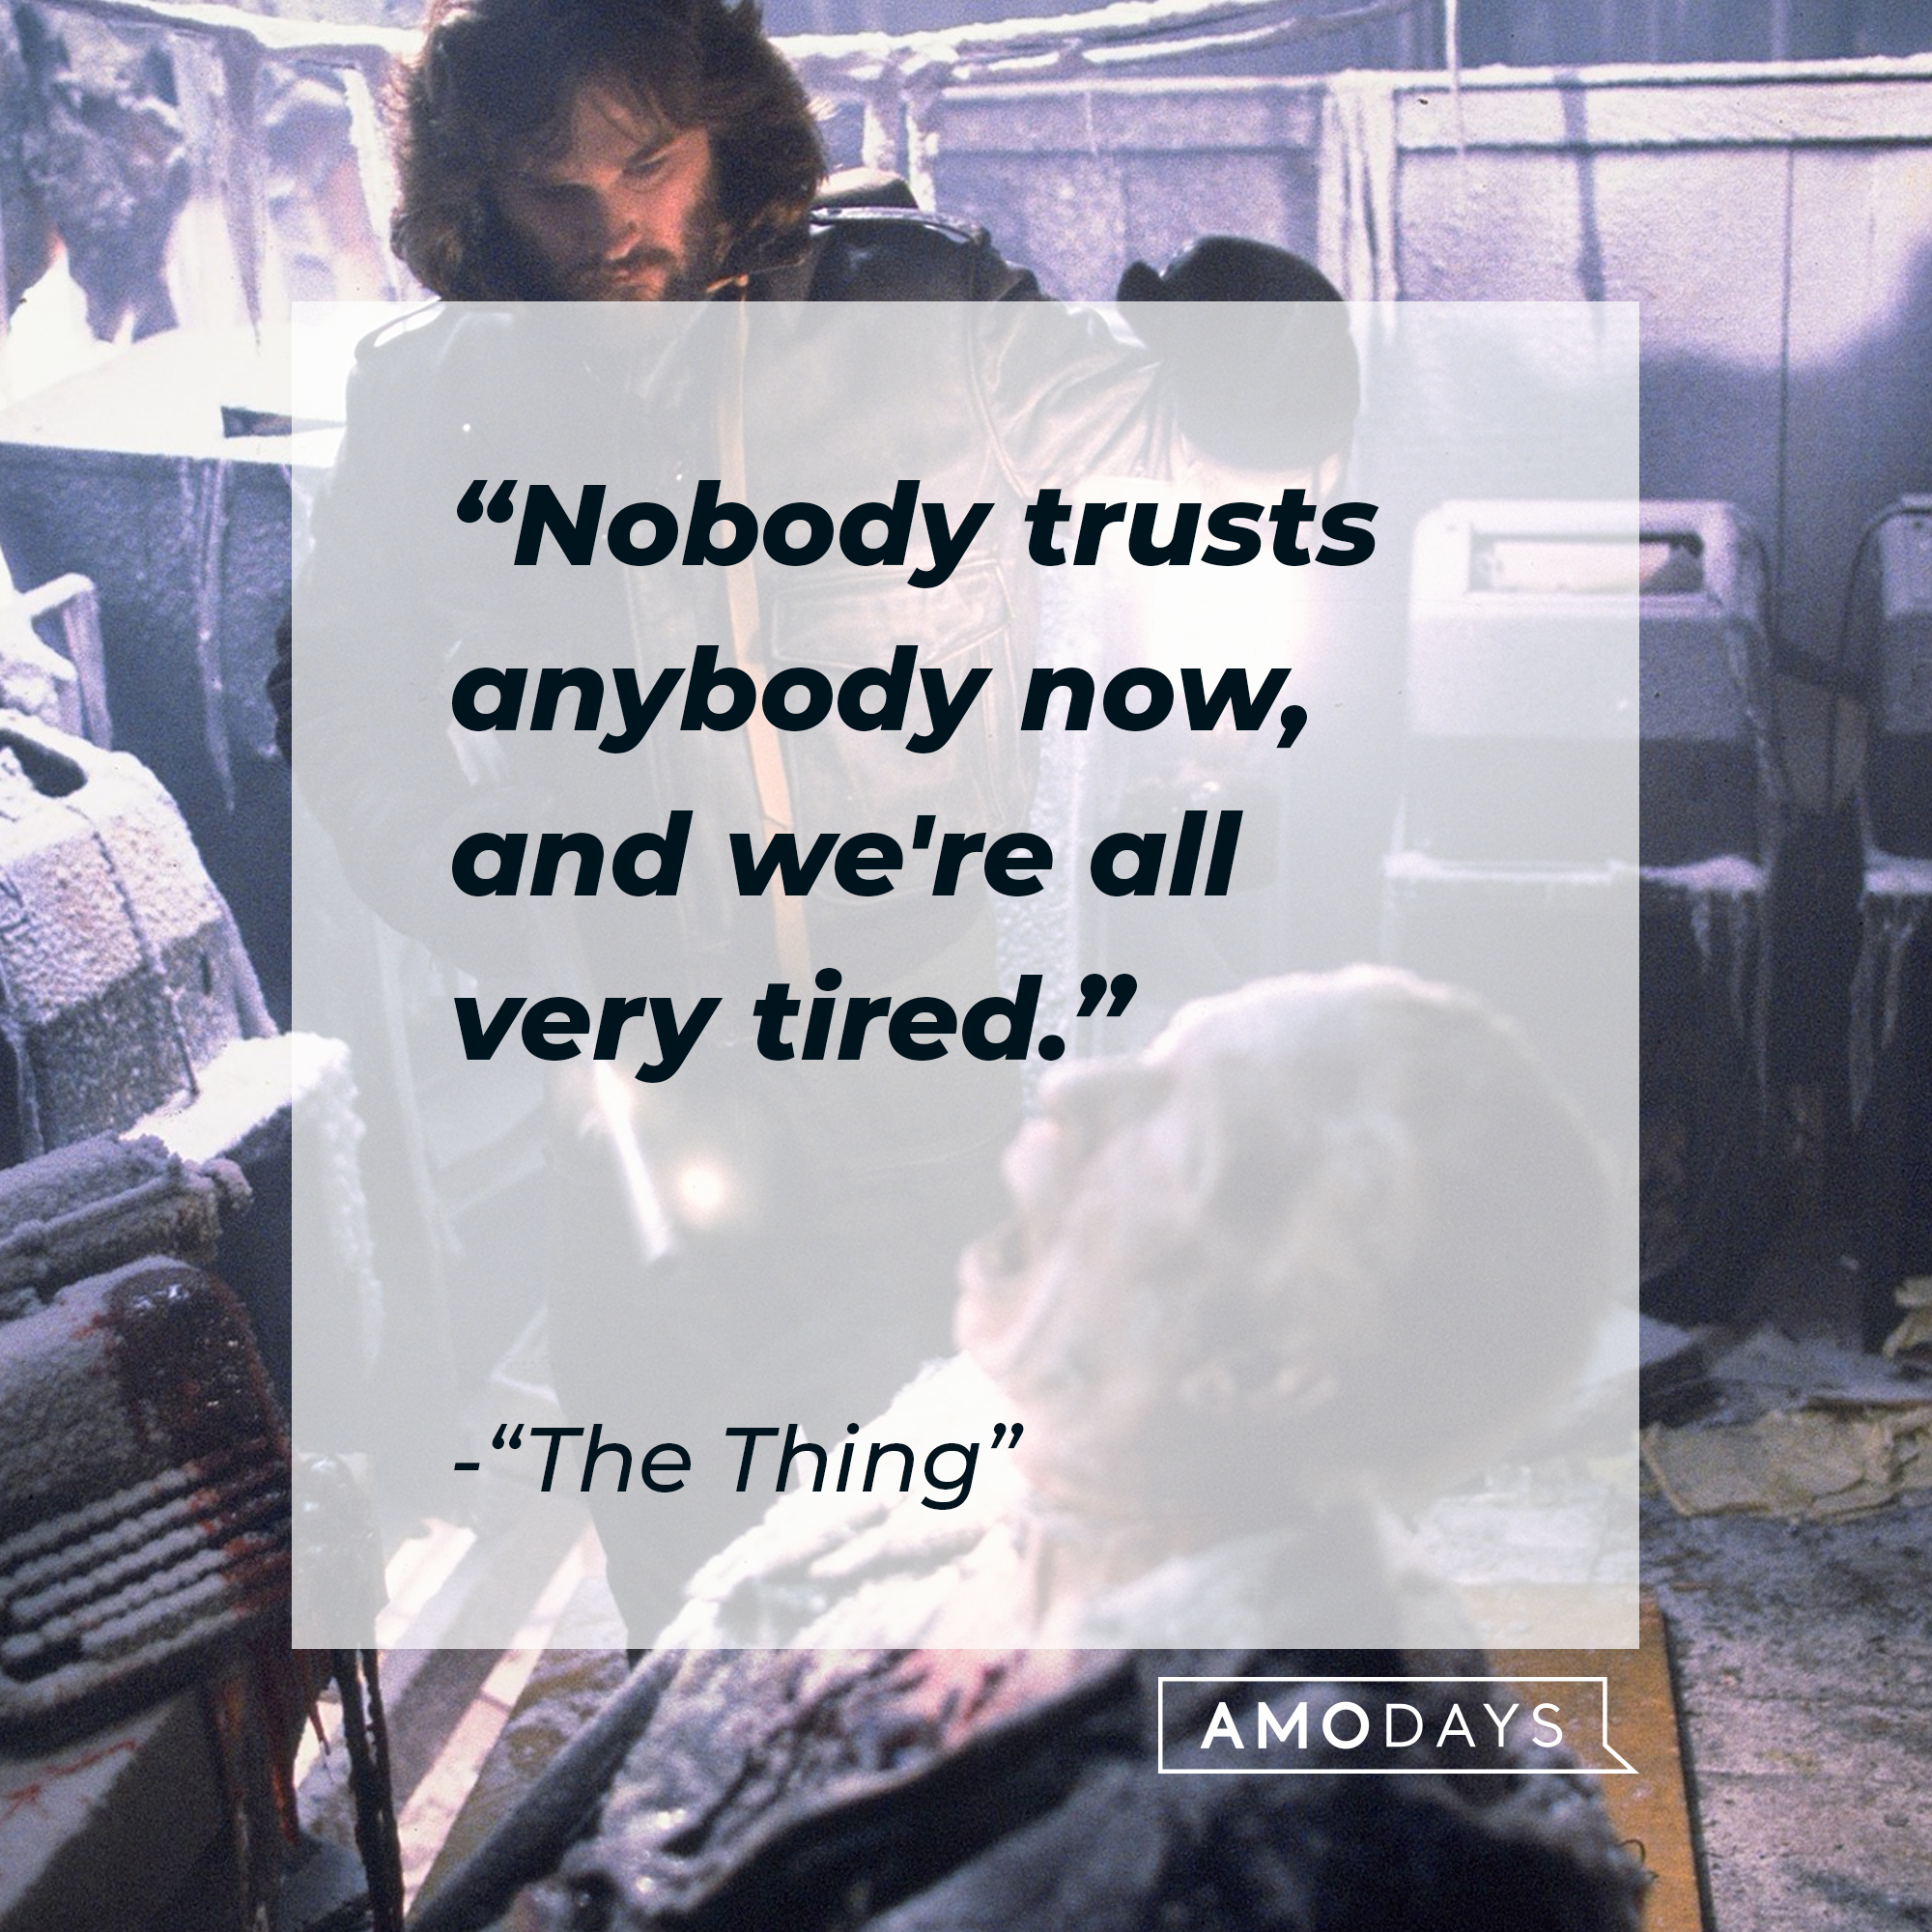 "The Thing" quote: "Nobody trusts anybody now, and we're all very tired." | Source: facebook.com/thethingmovie